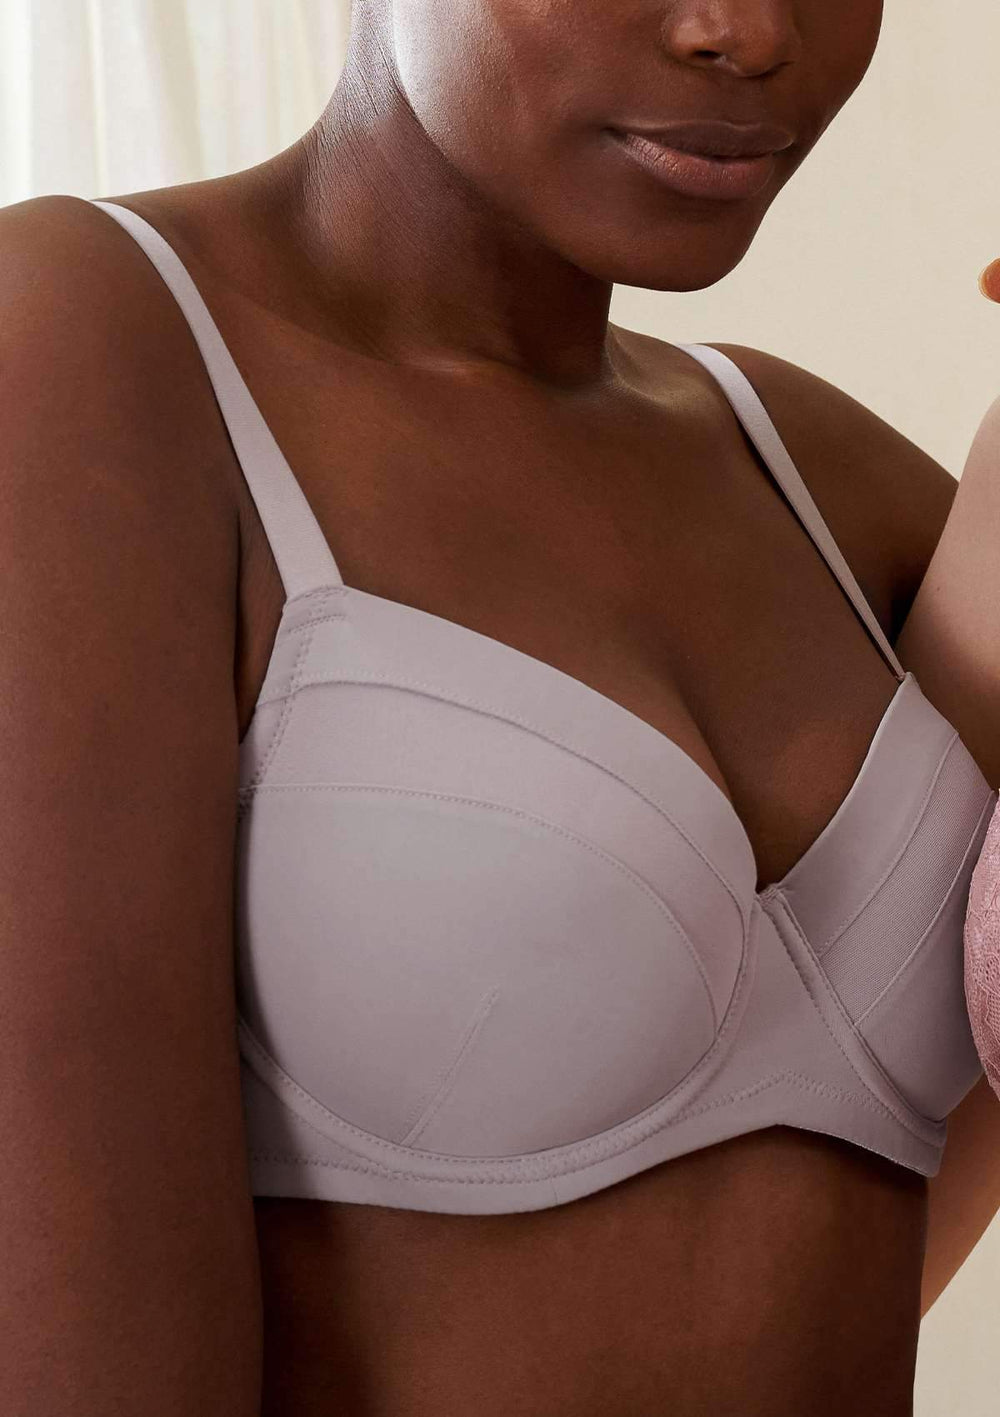 WOOLWORTHS - Find your perfect fit! The perfect bra feels as good